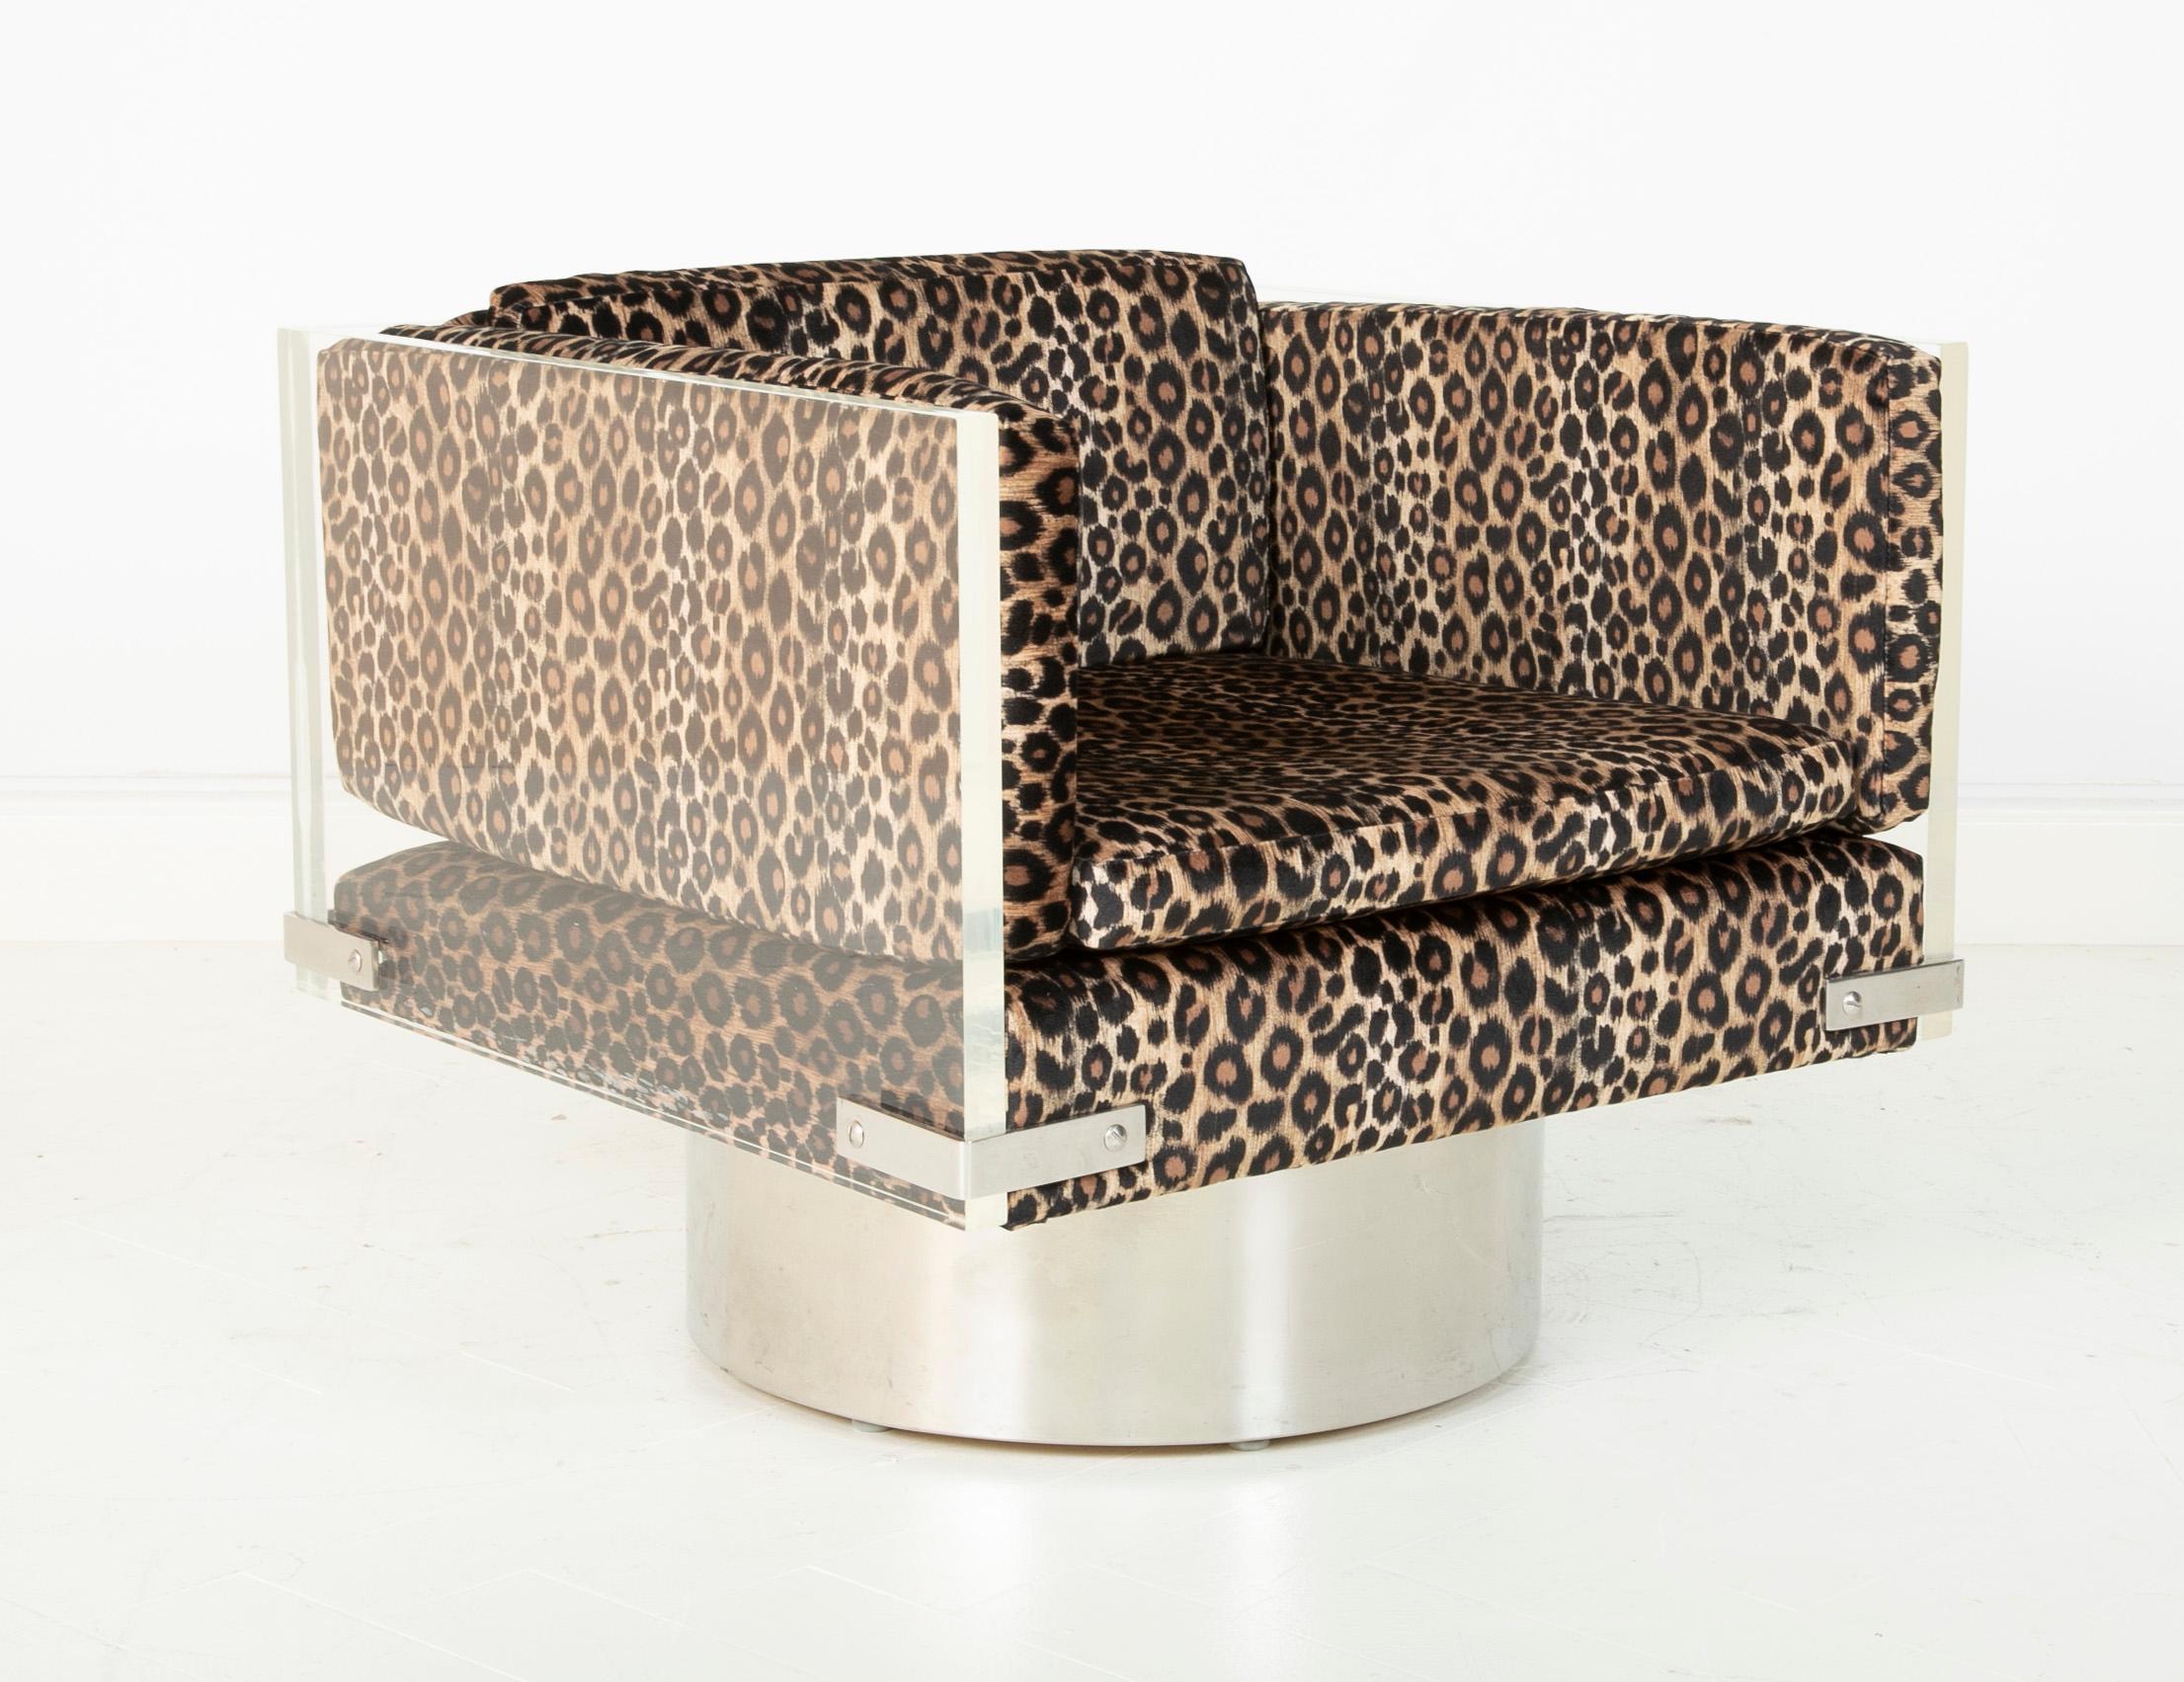 Midcentury Milo Baughman Lucite and chrome swivel chair with new leopard velvet upholstery.